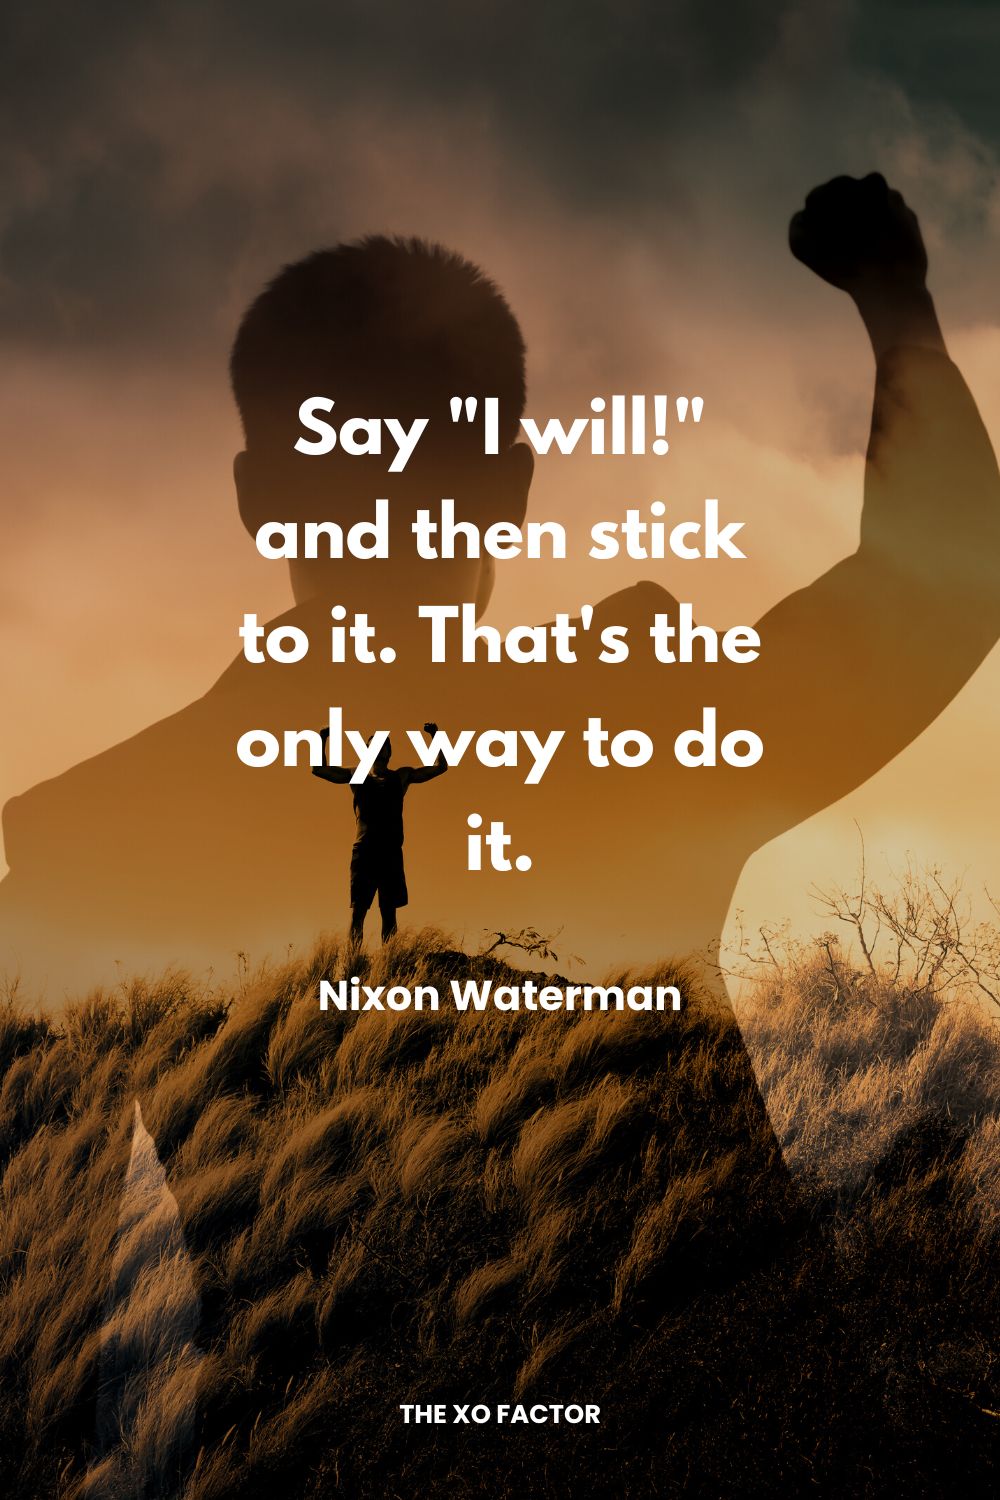 Say "I will!" and then stick to it. That's the only way to do it. Nixon Waterman,